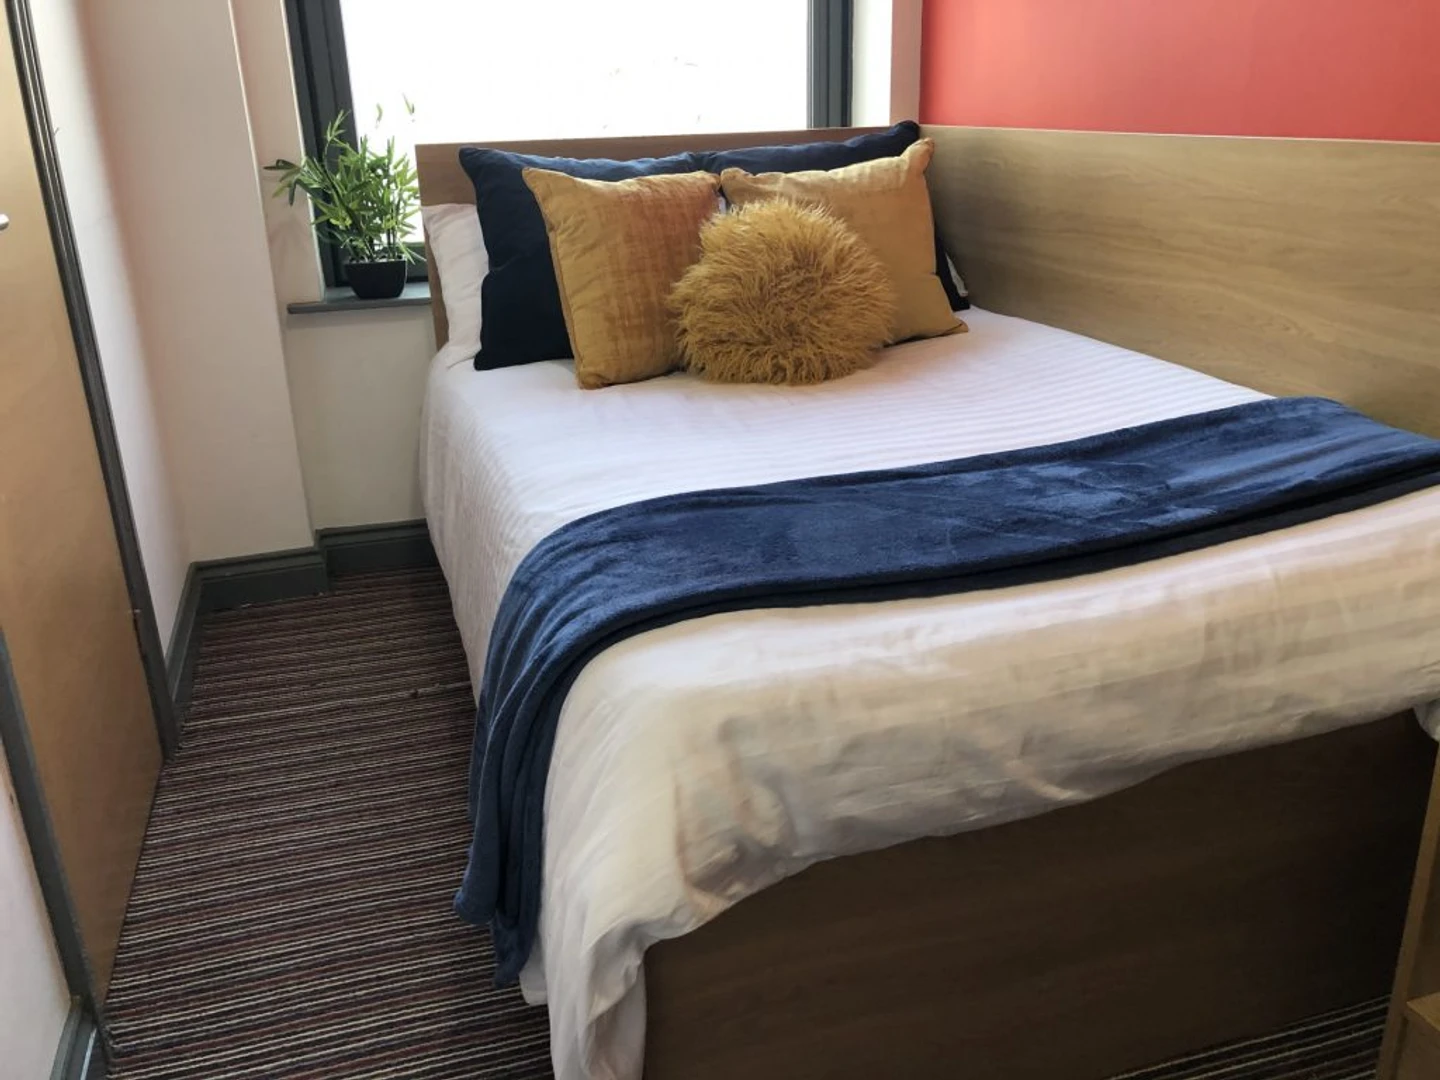 Cheap private room in Sunderland